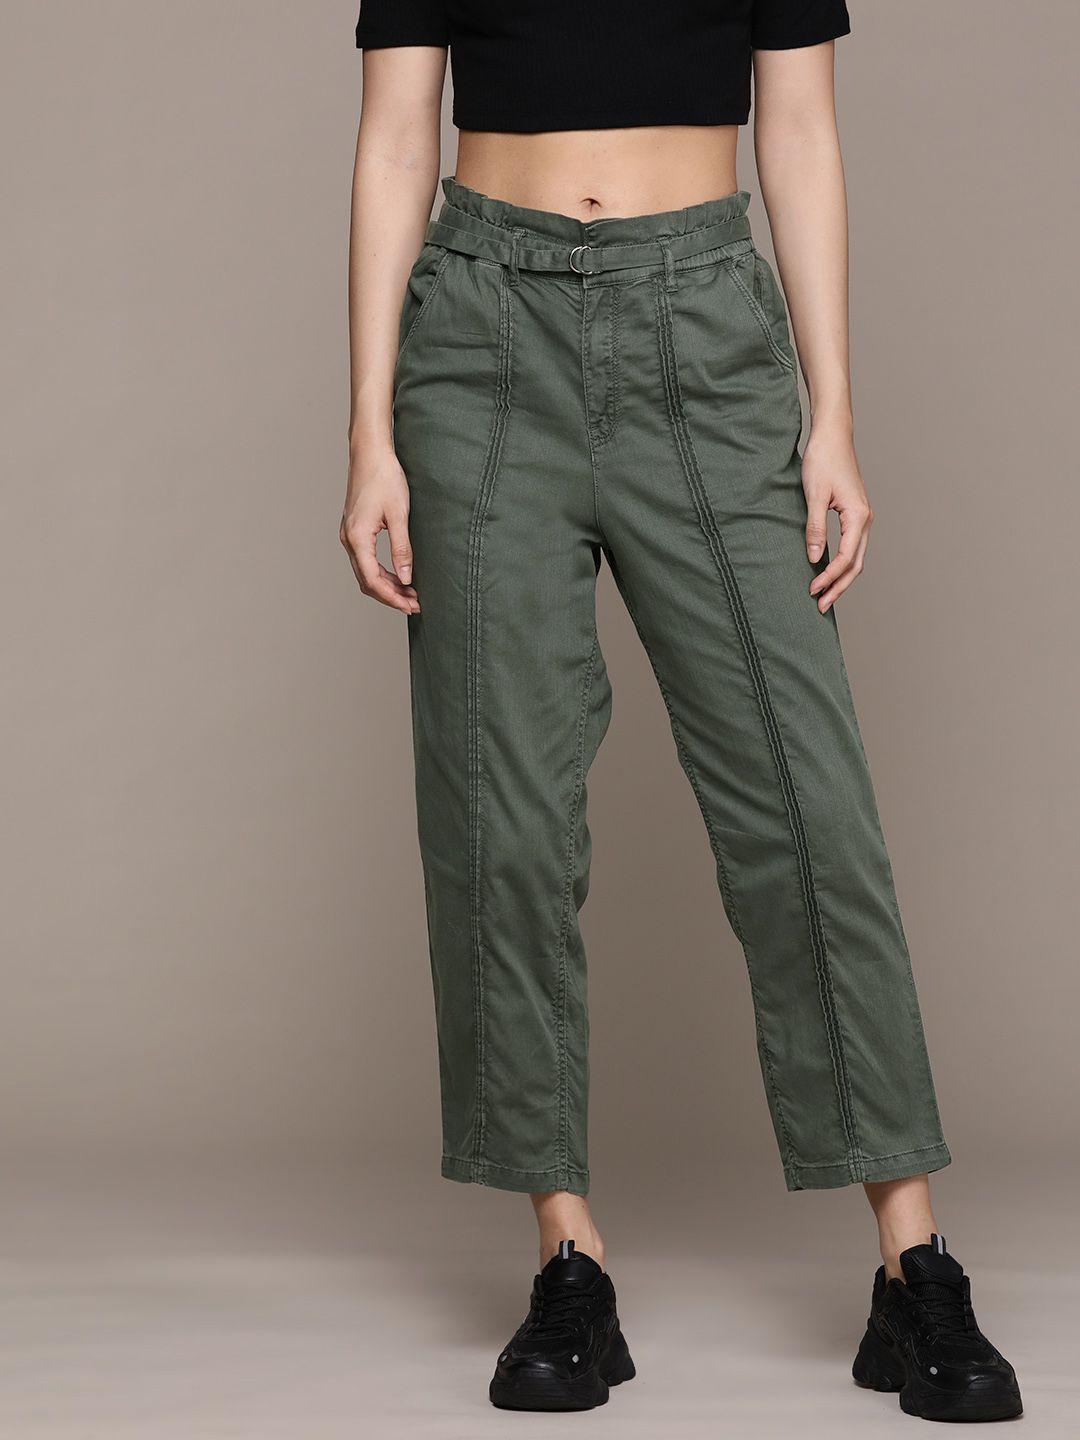 the roadster lifestyle co. women panelled trousers with belt